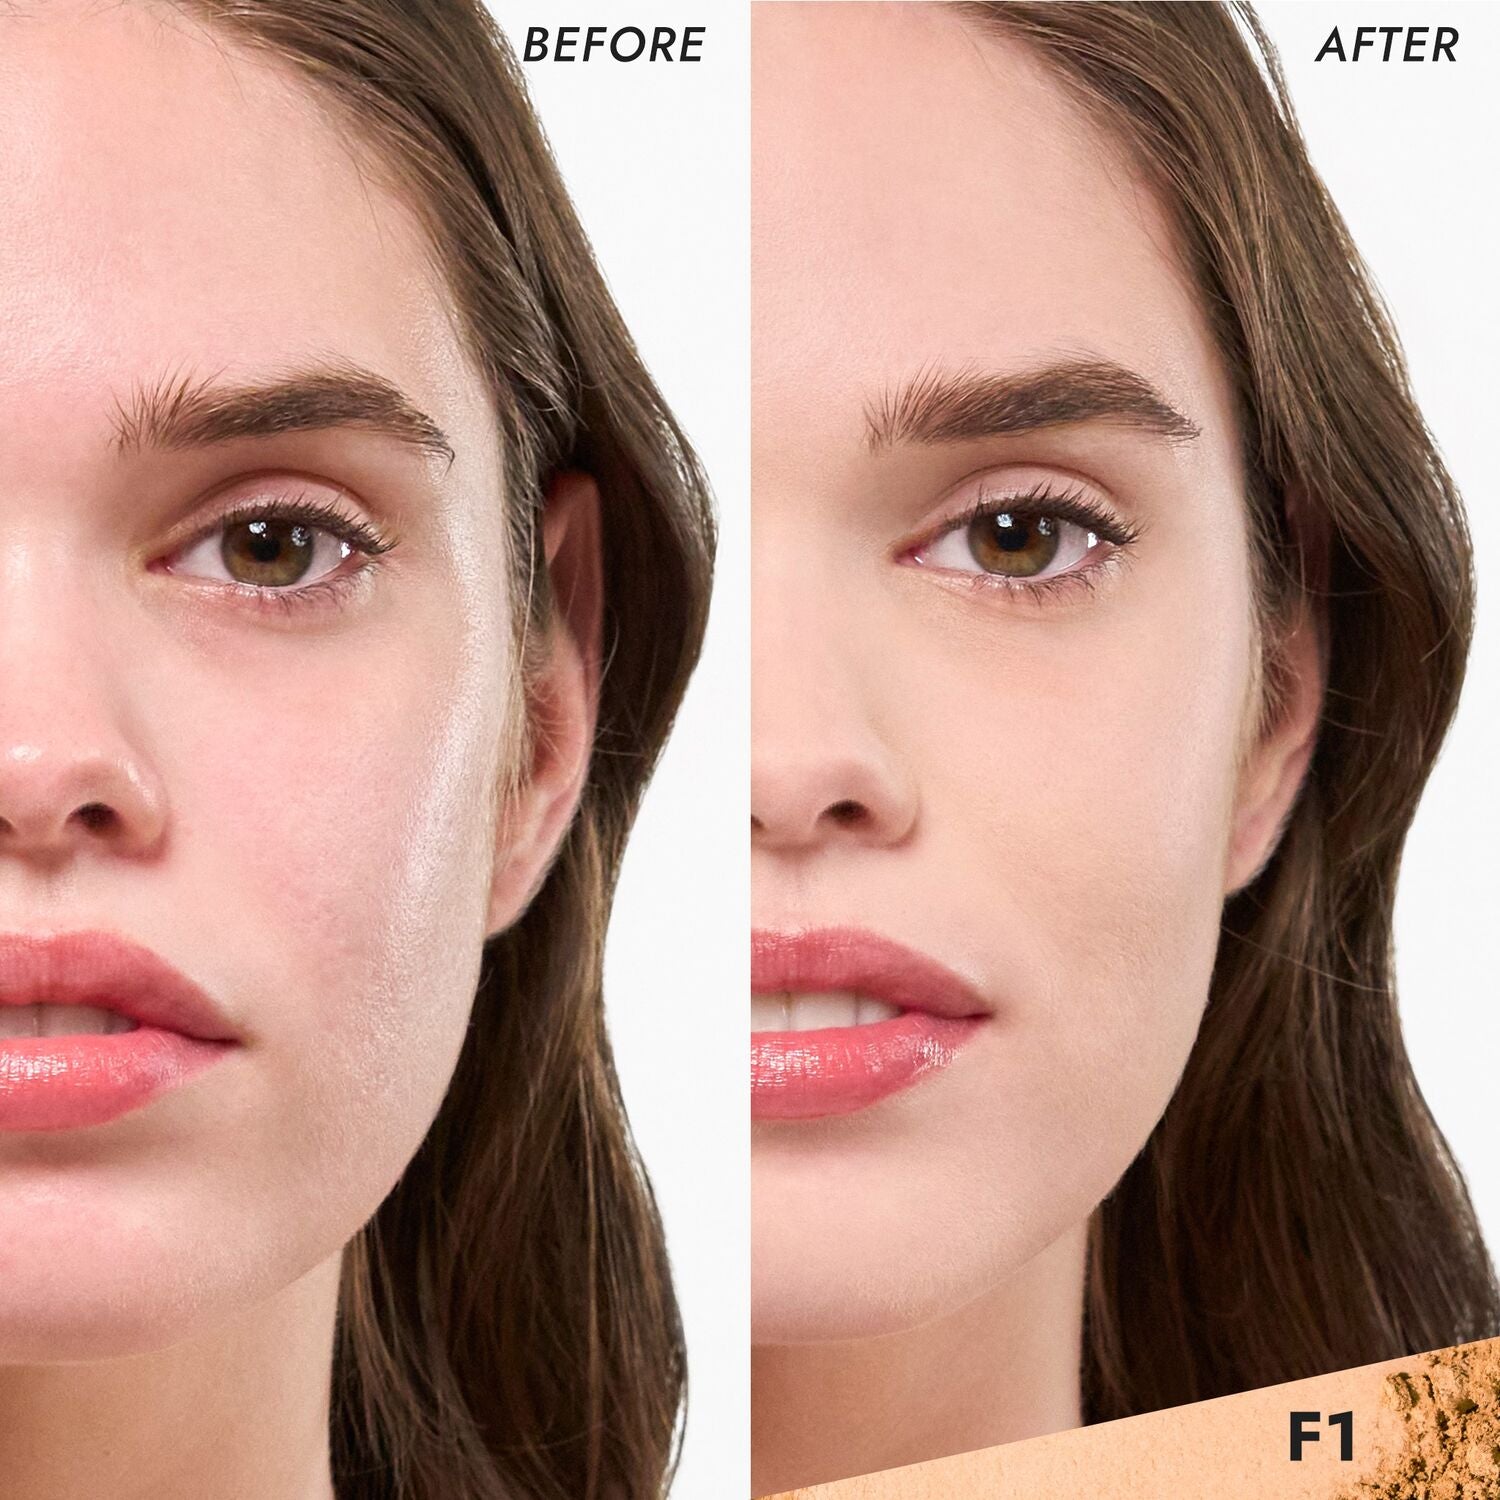 Coverfx Pressed Mineral Foundation model before and after image in shade  F1